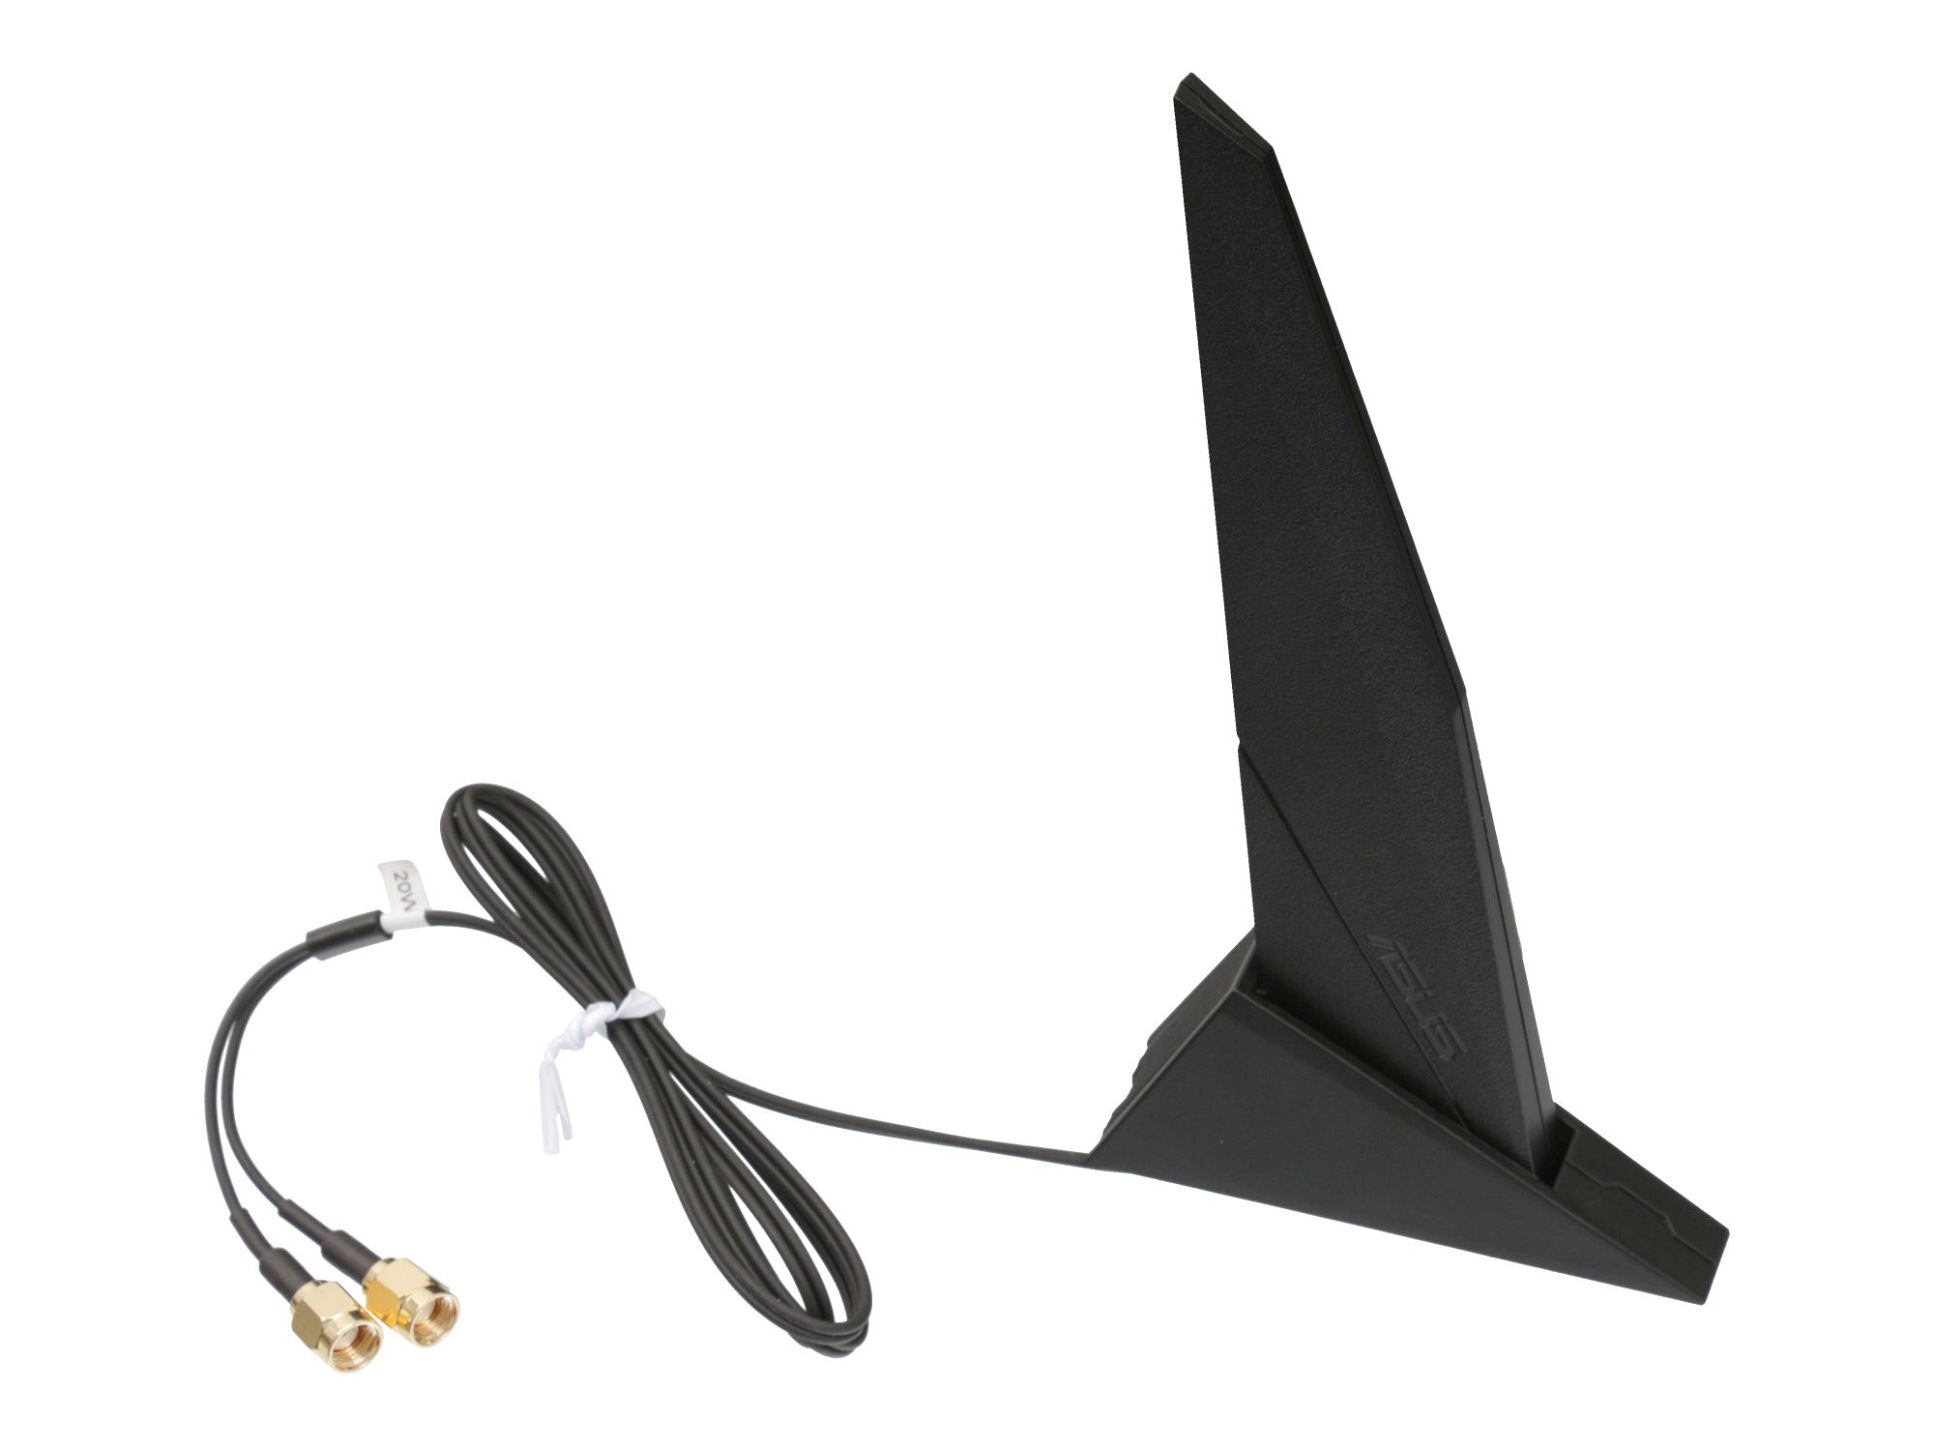 Externe Asus RP-SMA DIPOLE Antenne für Asus TUF GAMING Z590-PLUS WIFI